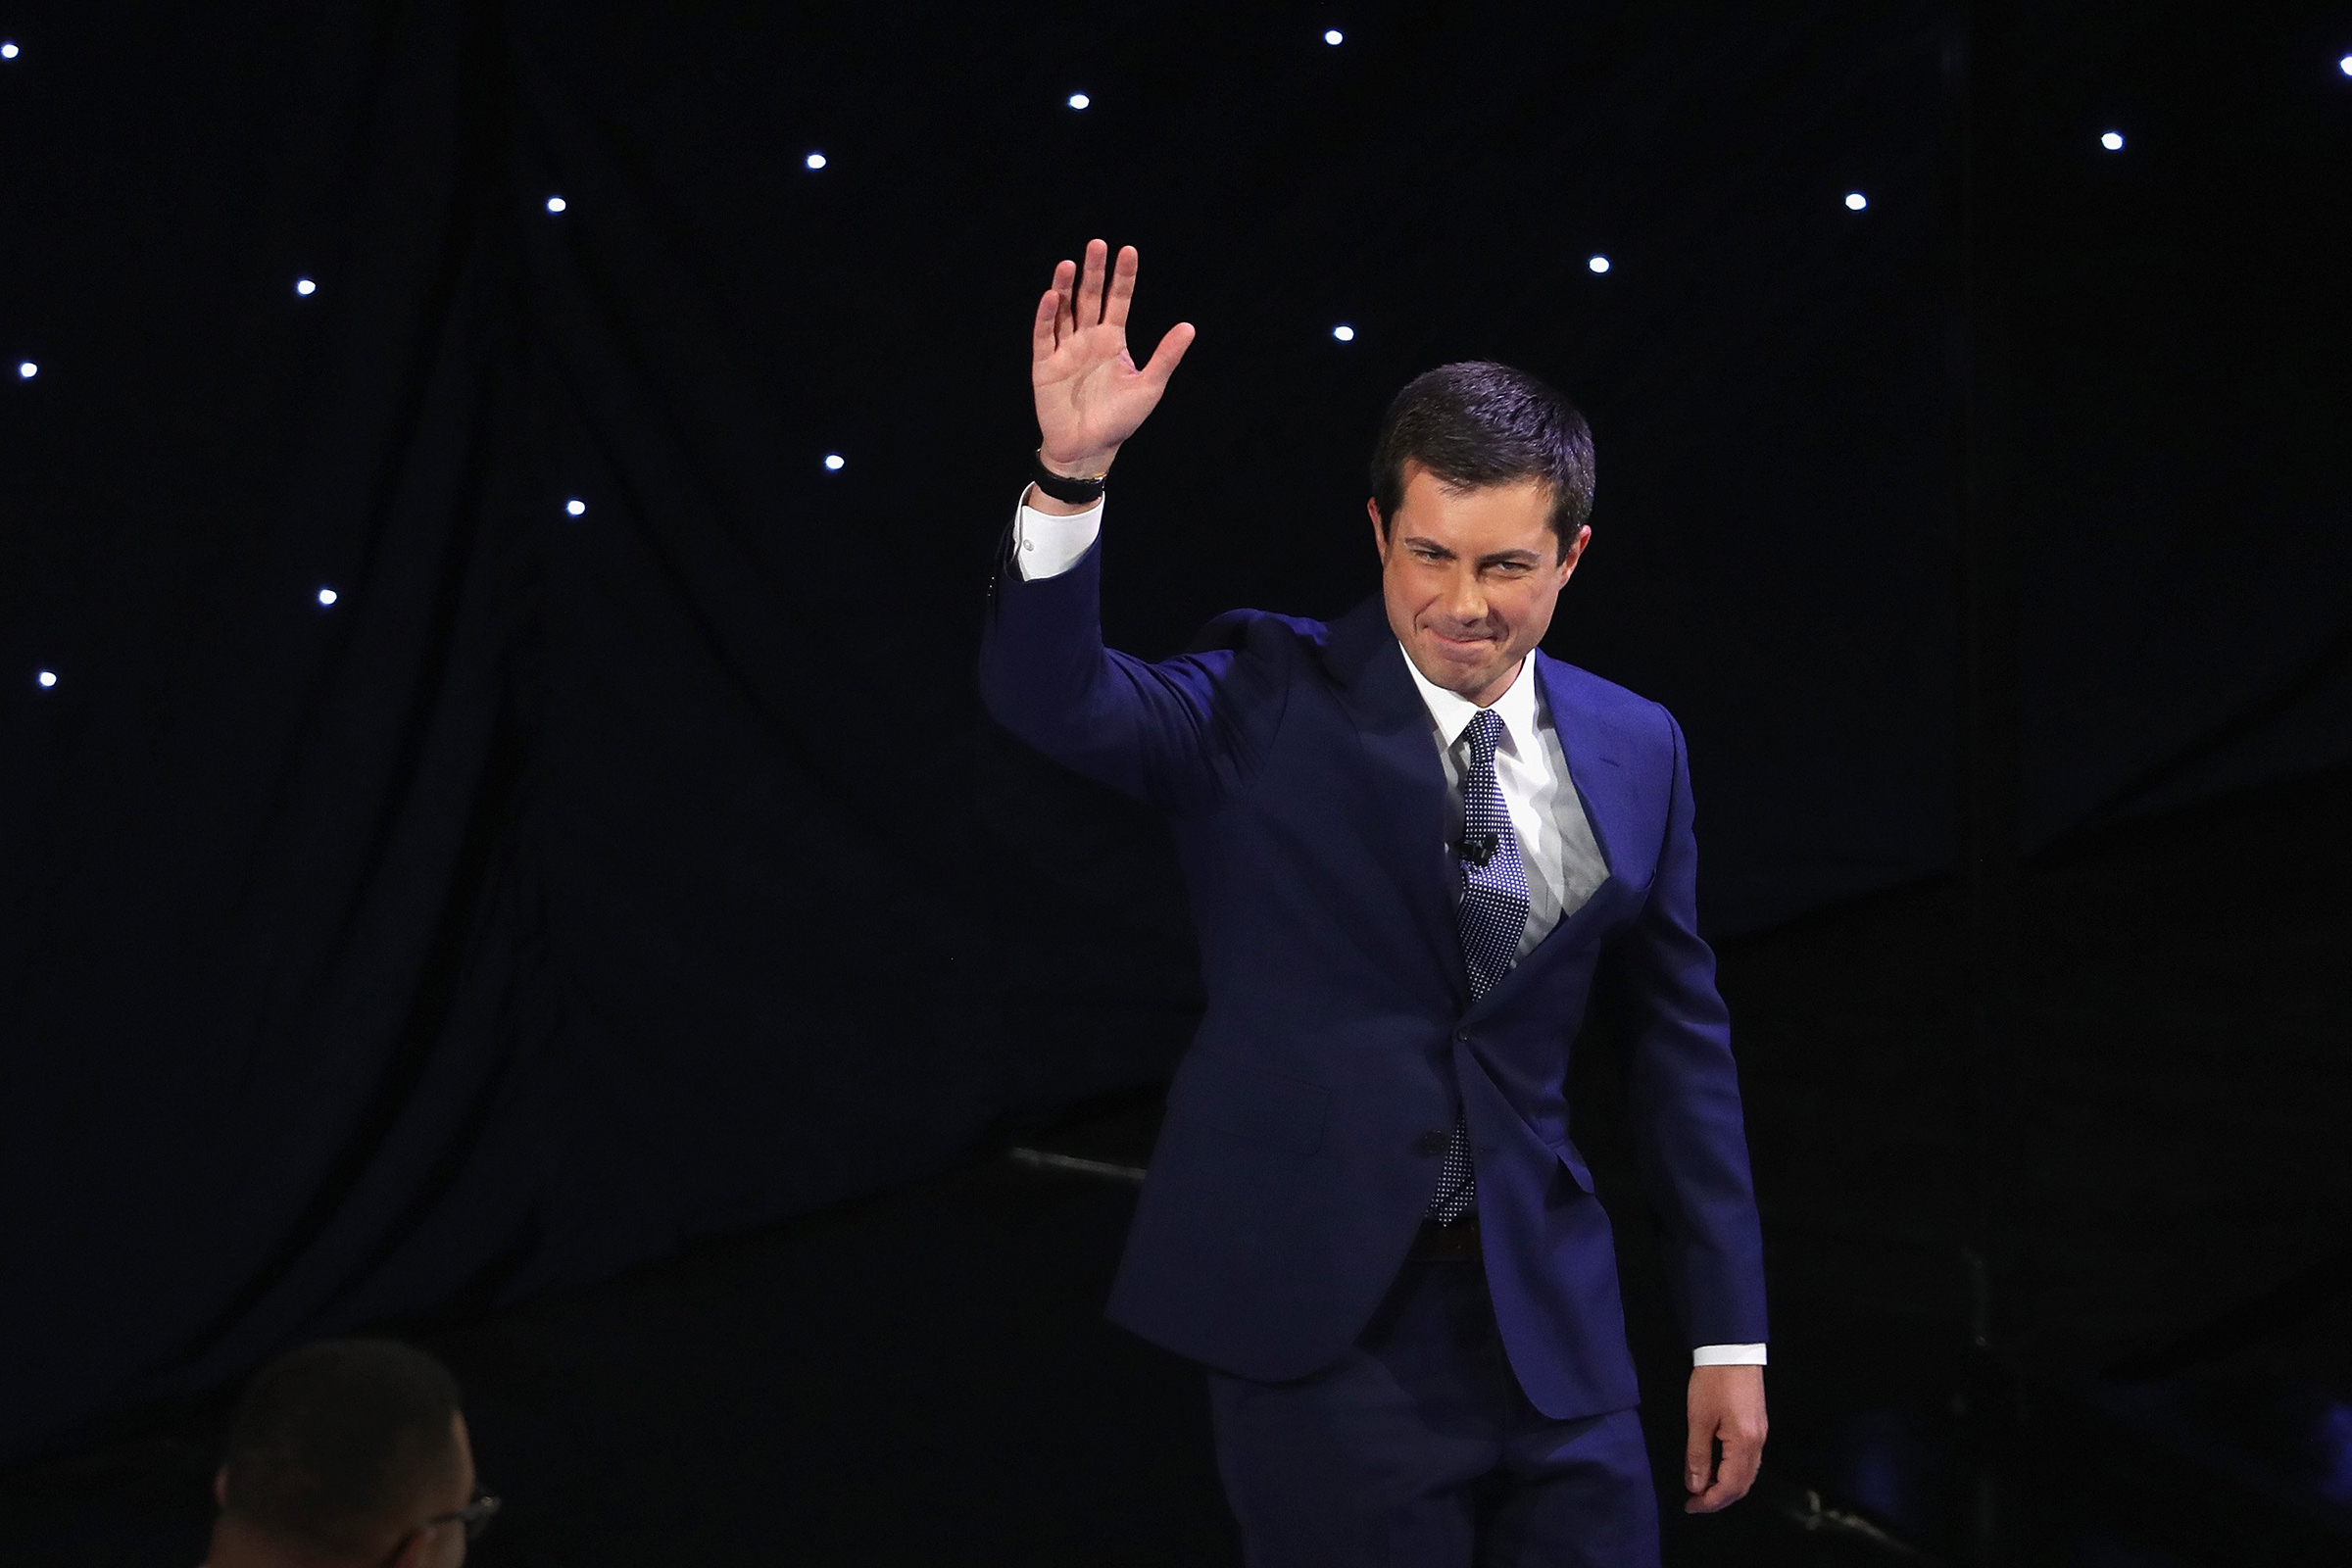 Democratic presidential candidate South Bend, Indiana Mayor Pete Buttigieg takes the stage at the beginning of the Democratic Presidential Debate at the Fox Theatre July 30, 2019 in Detroit, Michigan. (Justin Sullivan—Getty Images)